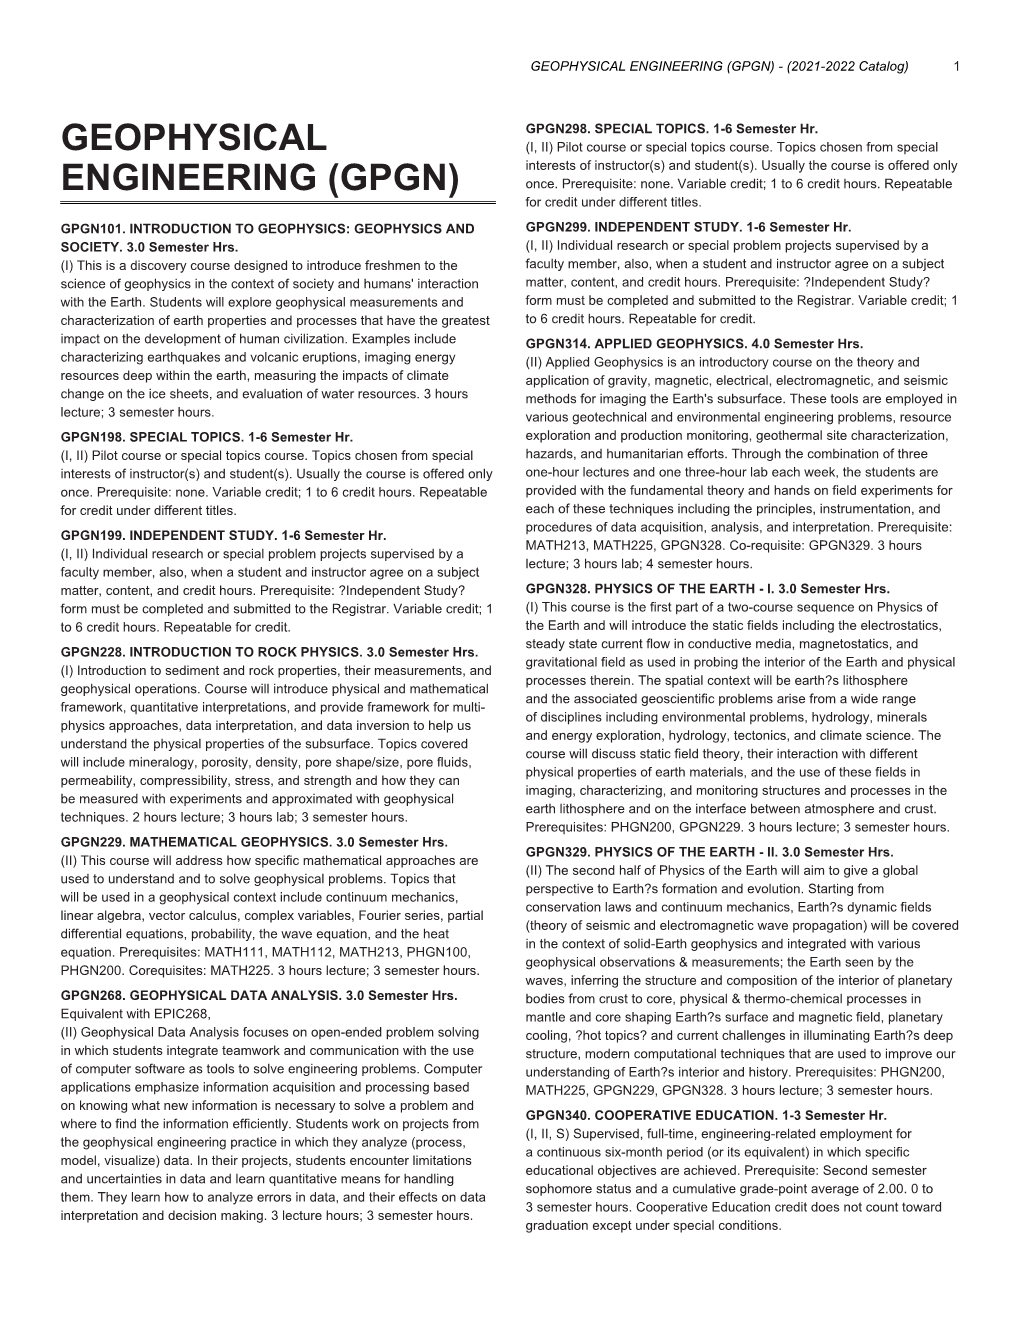 GEOPHYSICAL ENGINEERING (GPGN) - (2021-2022 Catalog) 1